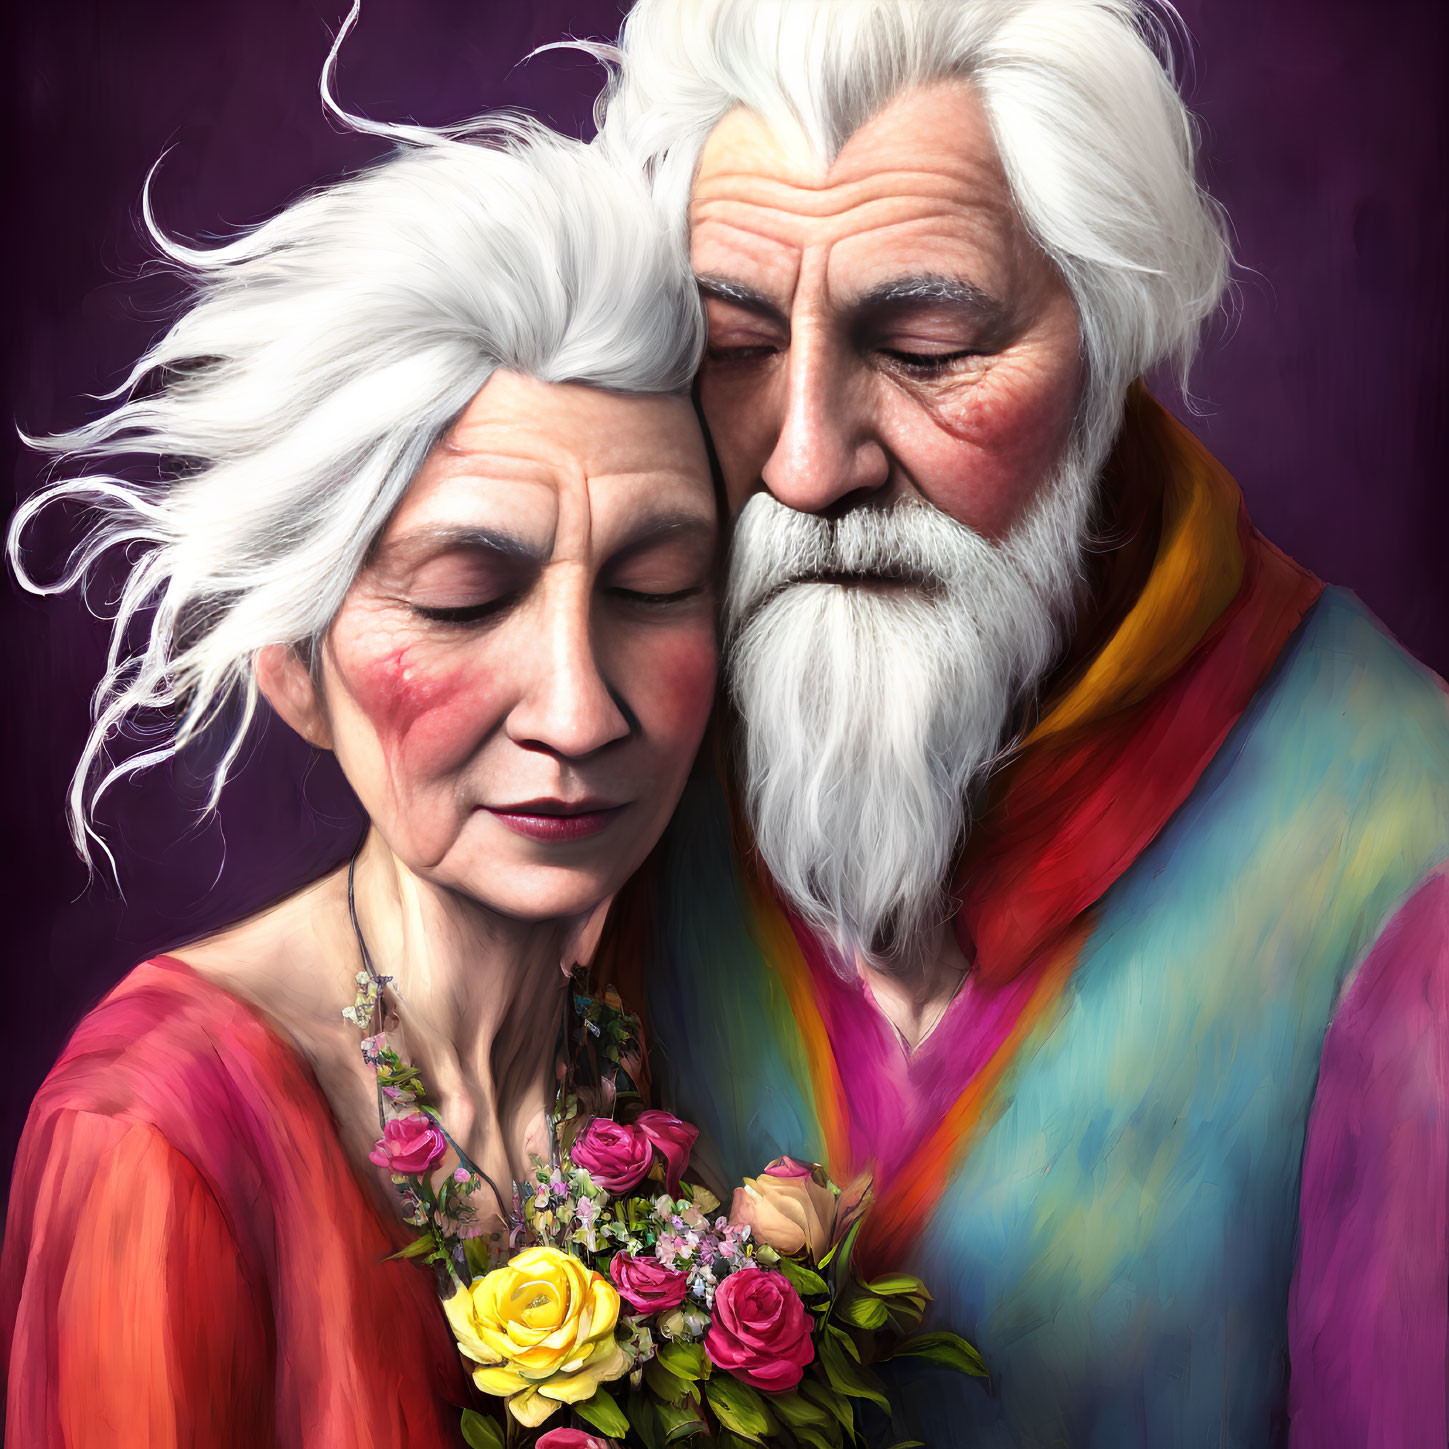 Elderly couple with white hair embracing, woman holding flowers.